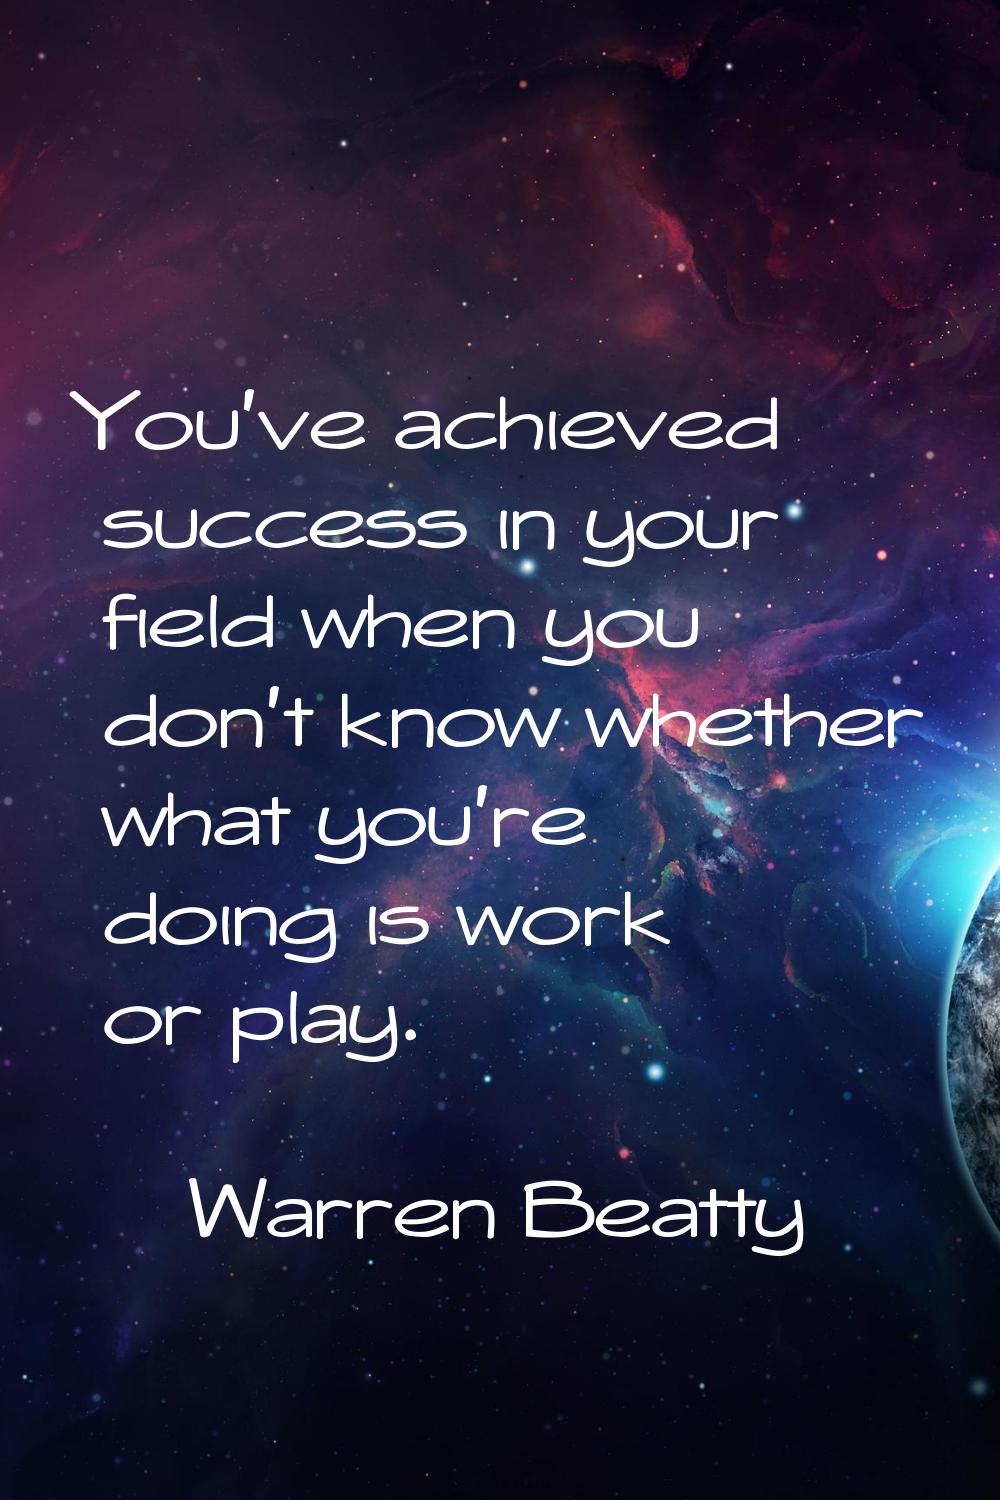 You've achieved success in your field when you don't know whether what you're doing is work or play